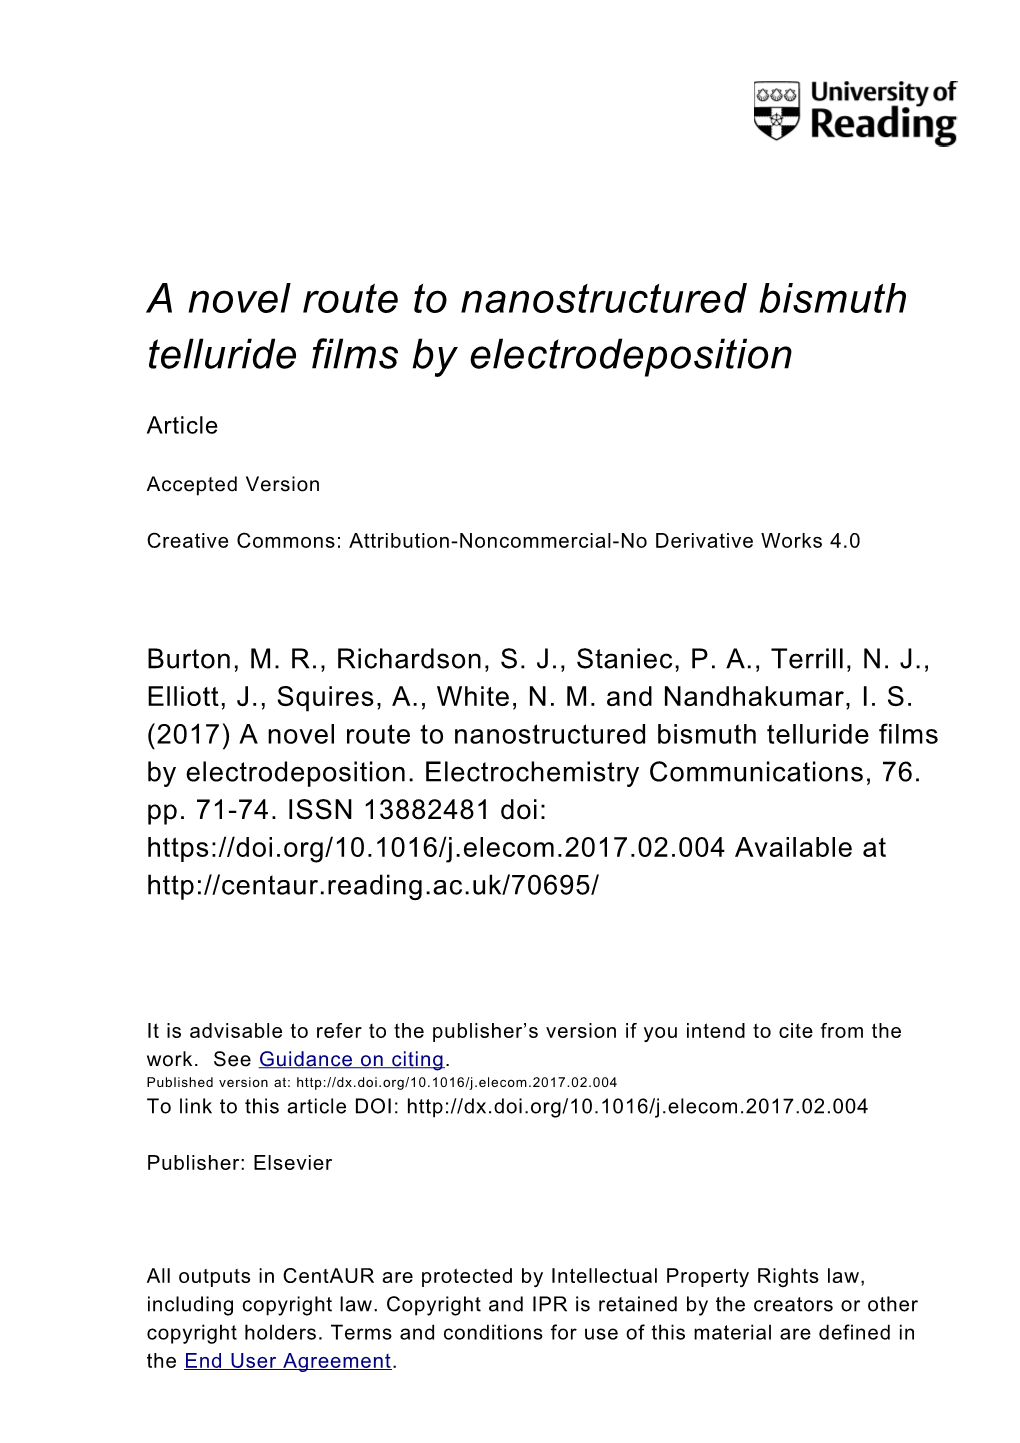 A Novel Route to Nanostructured Bismuth Telluride Films by Electrodeposition